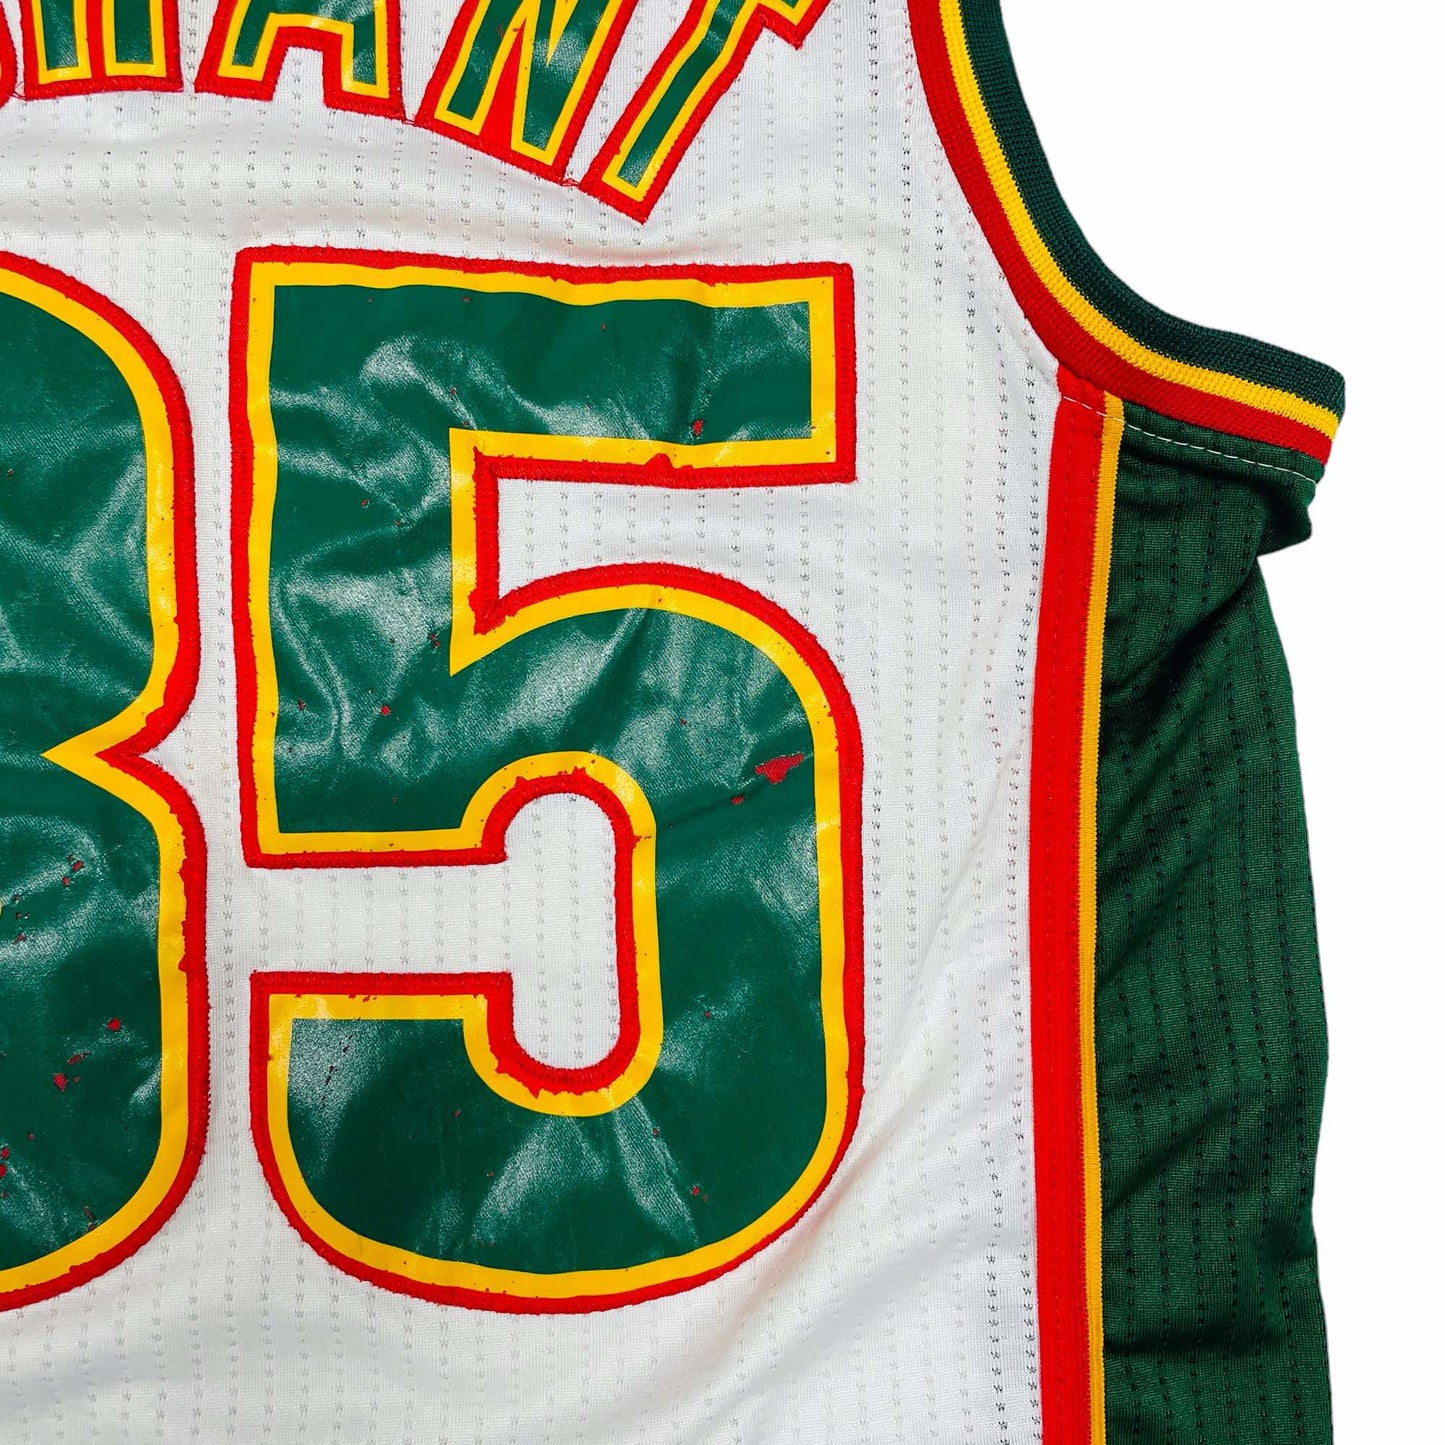 seattle supersonics durant jersey